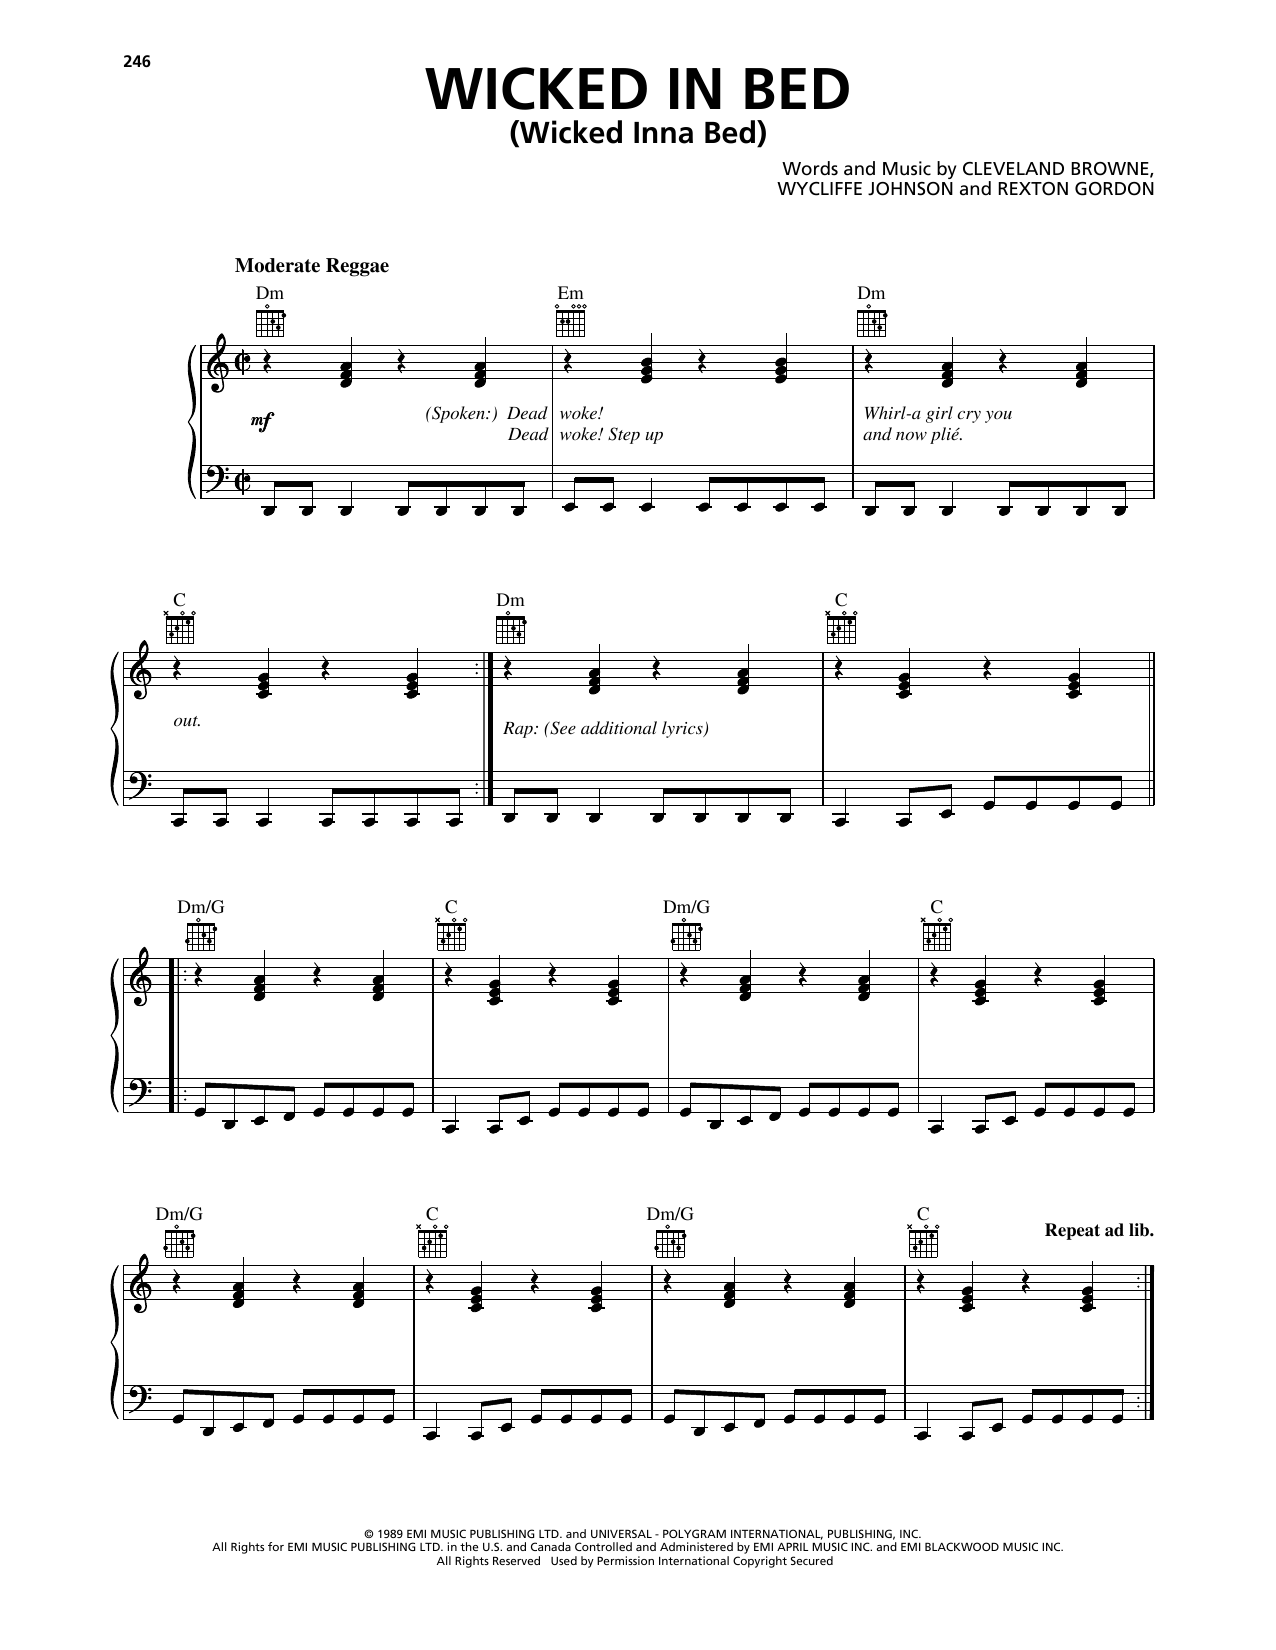 Shabba Ranks Wicked In Bed (Wicked Inna Bed) sheet music notes printable PDF score